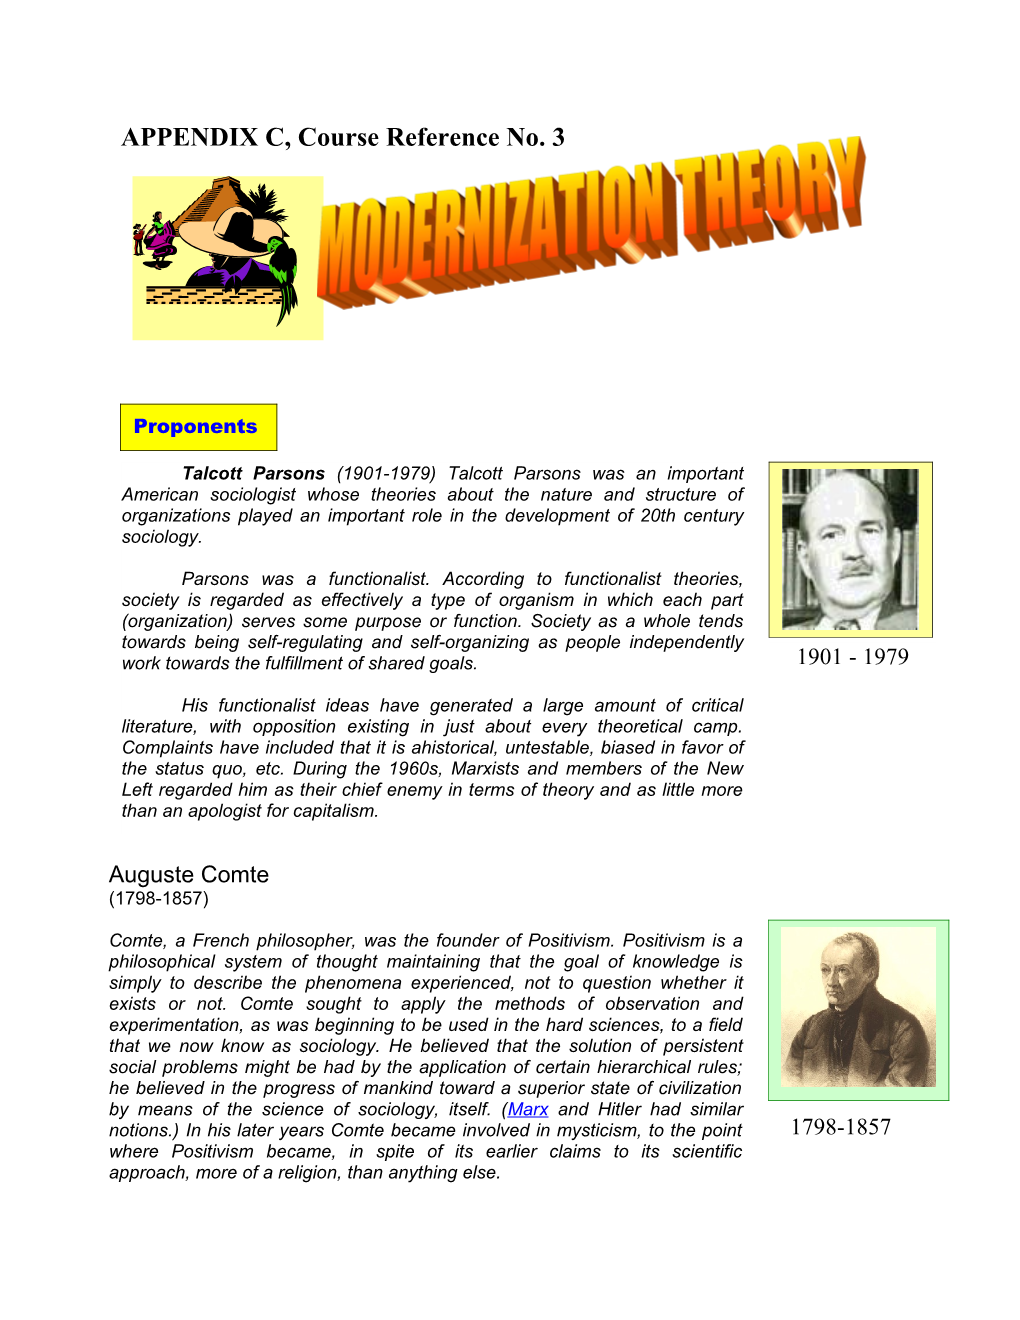 MODERNIZATION THEORY and the LAWS of SOCIAL CHANGE (Notes by Róbinson Rojas)(1996) MODERNIZATION